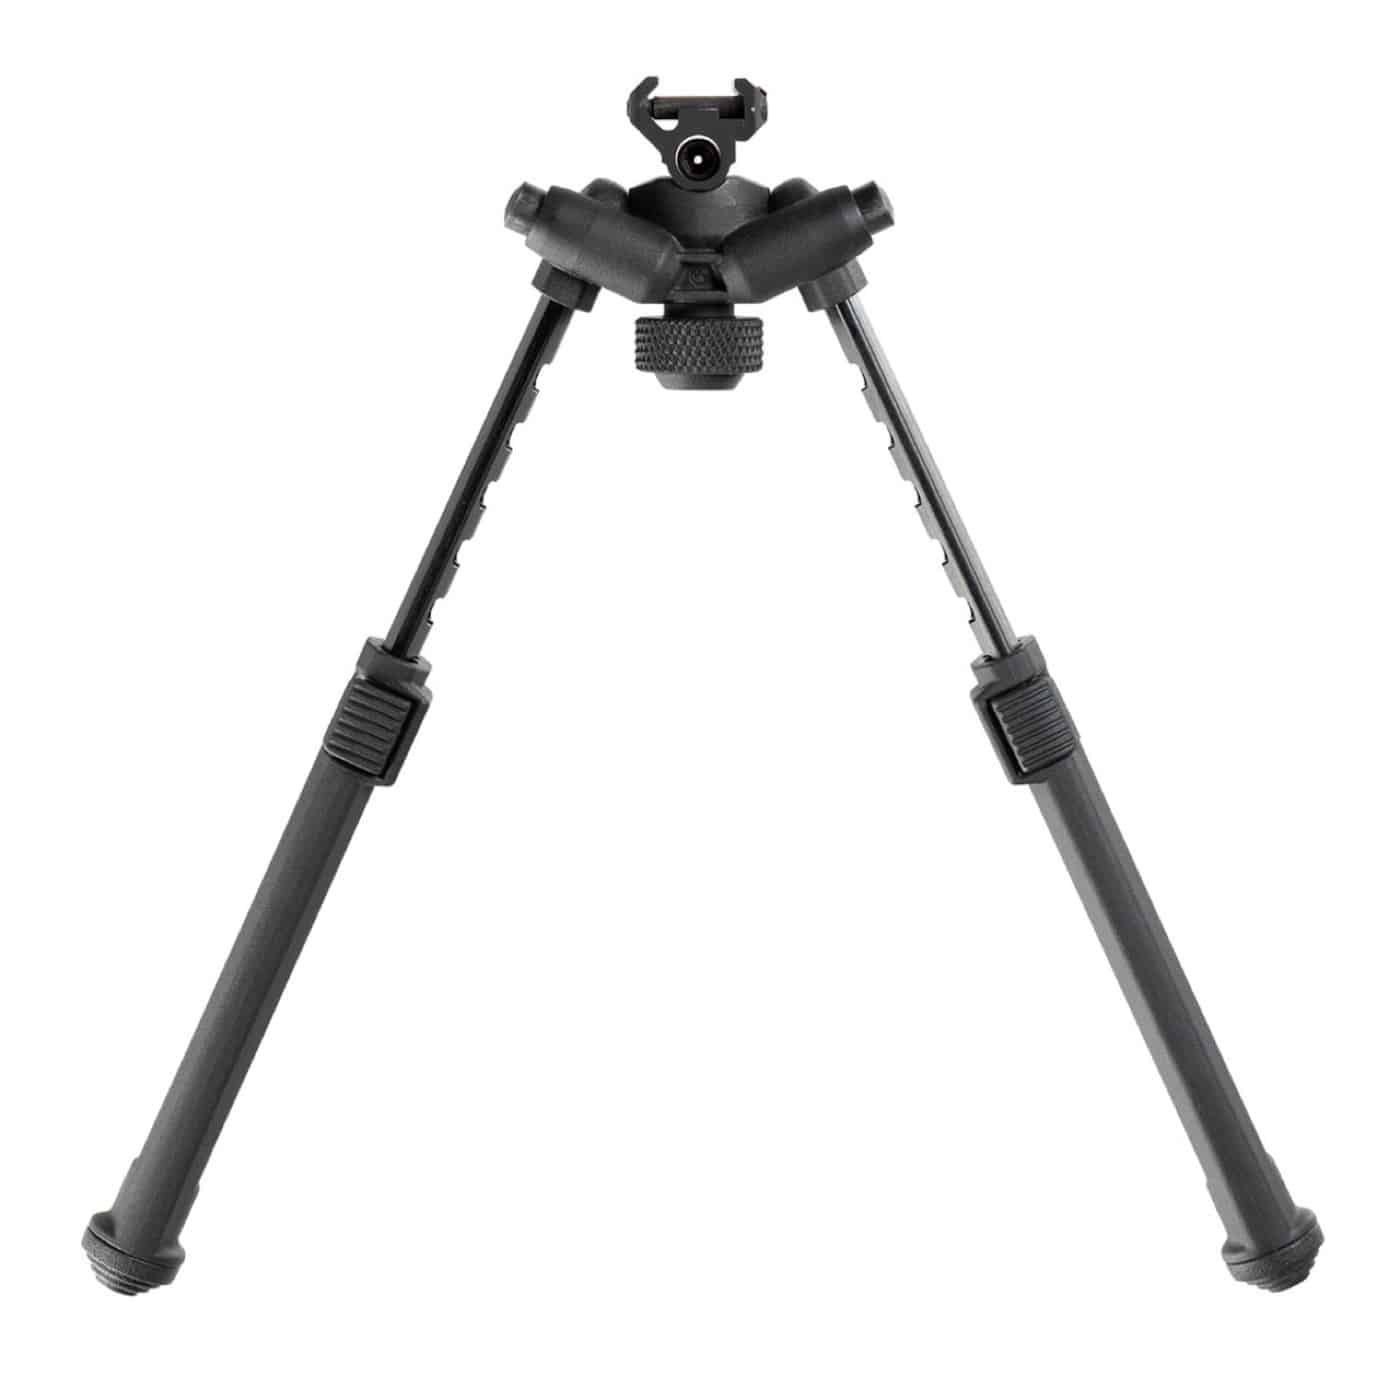 Shown here at maximum extension, the Magpul bipod legs offer a significant amount of adjustment.